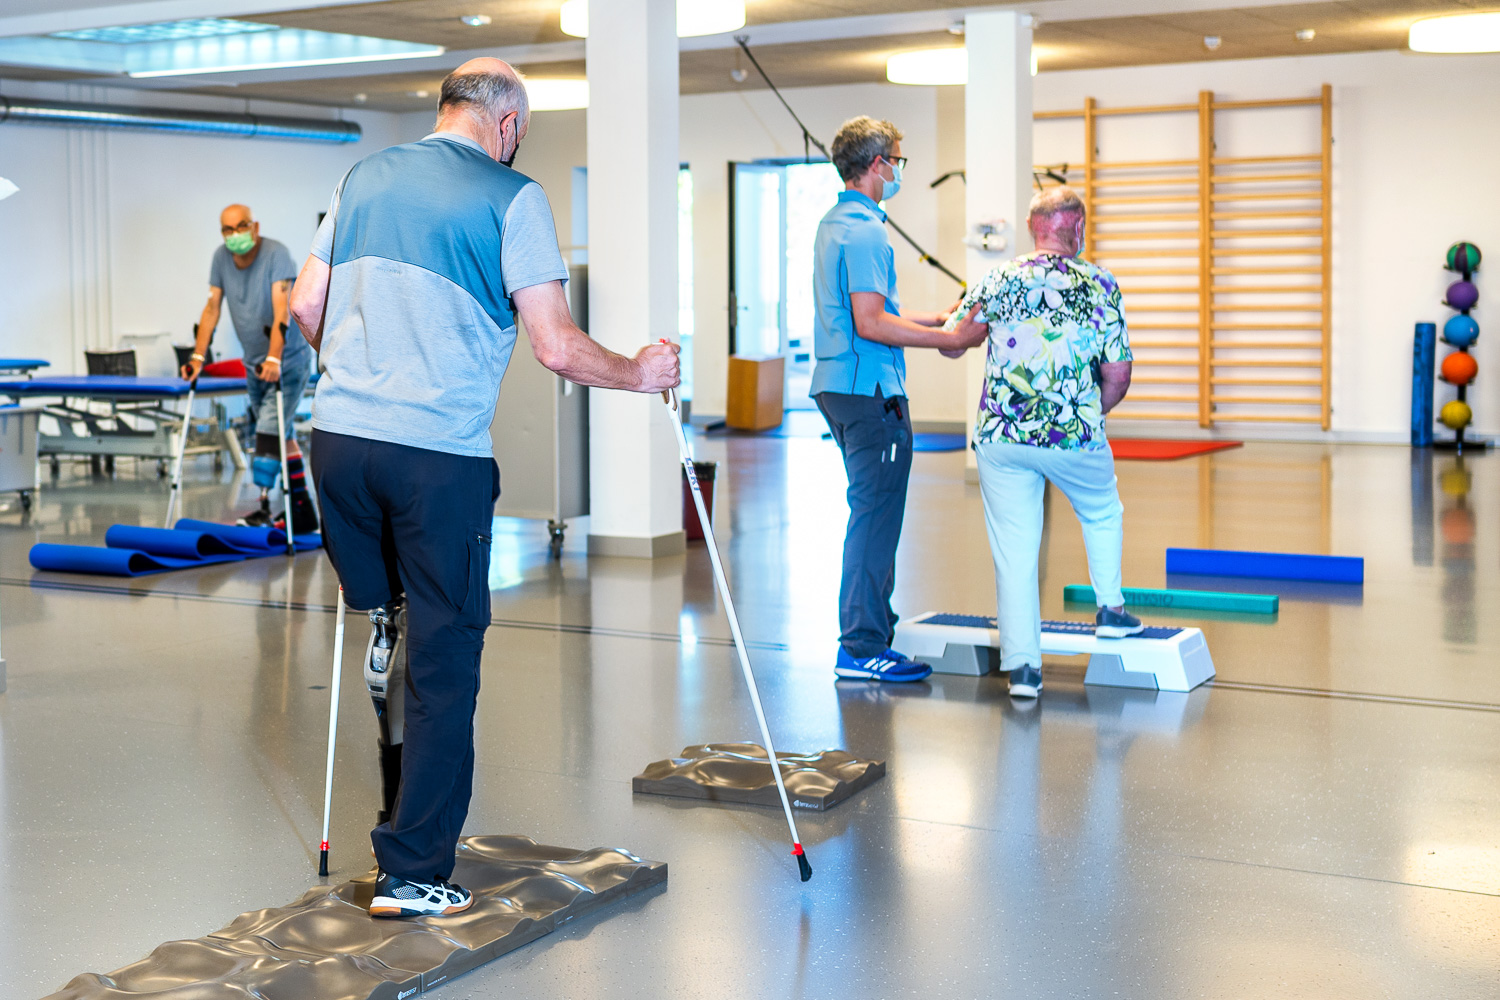 Therapists accompany patients on a gait safety course.